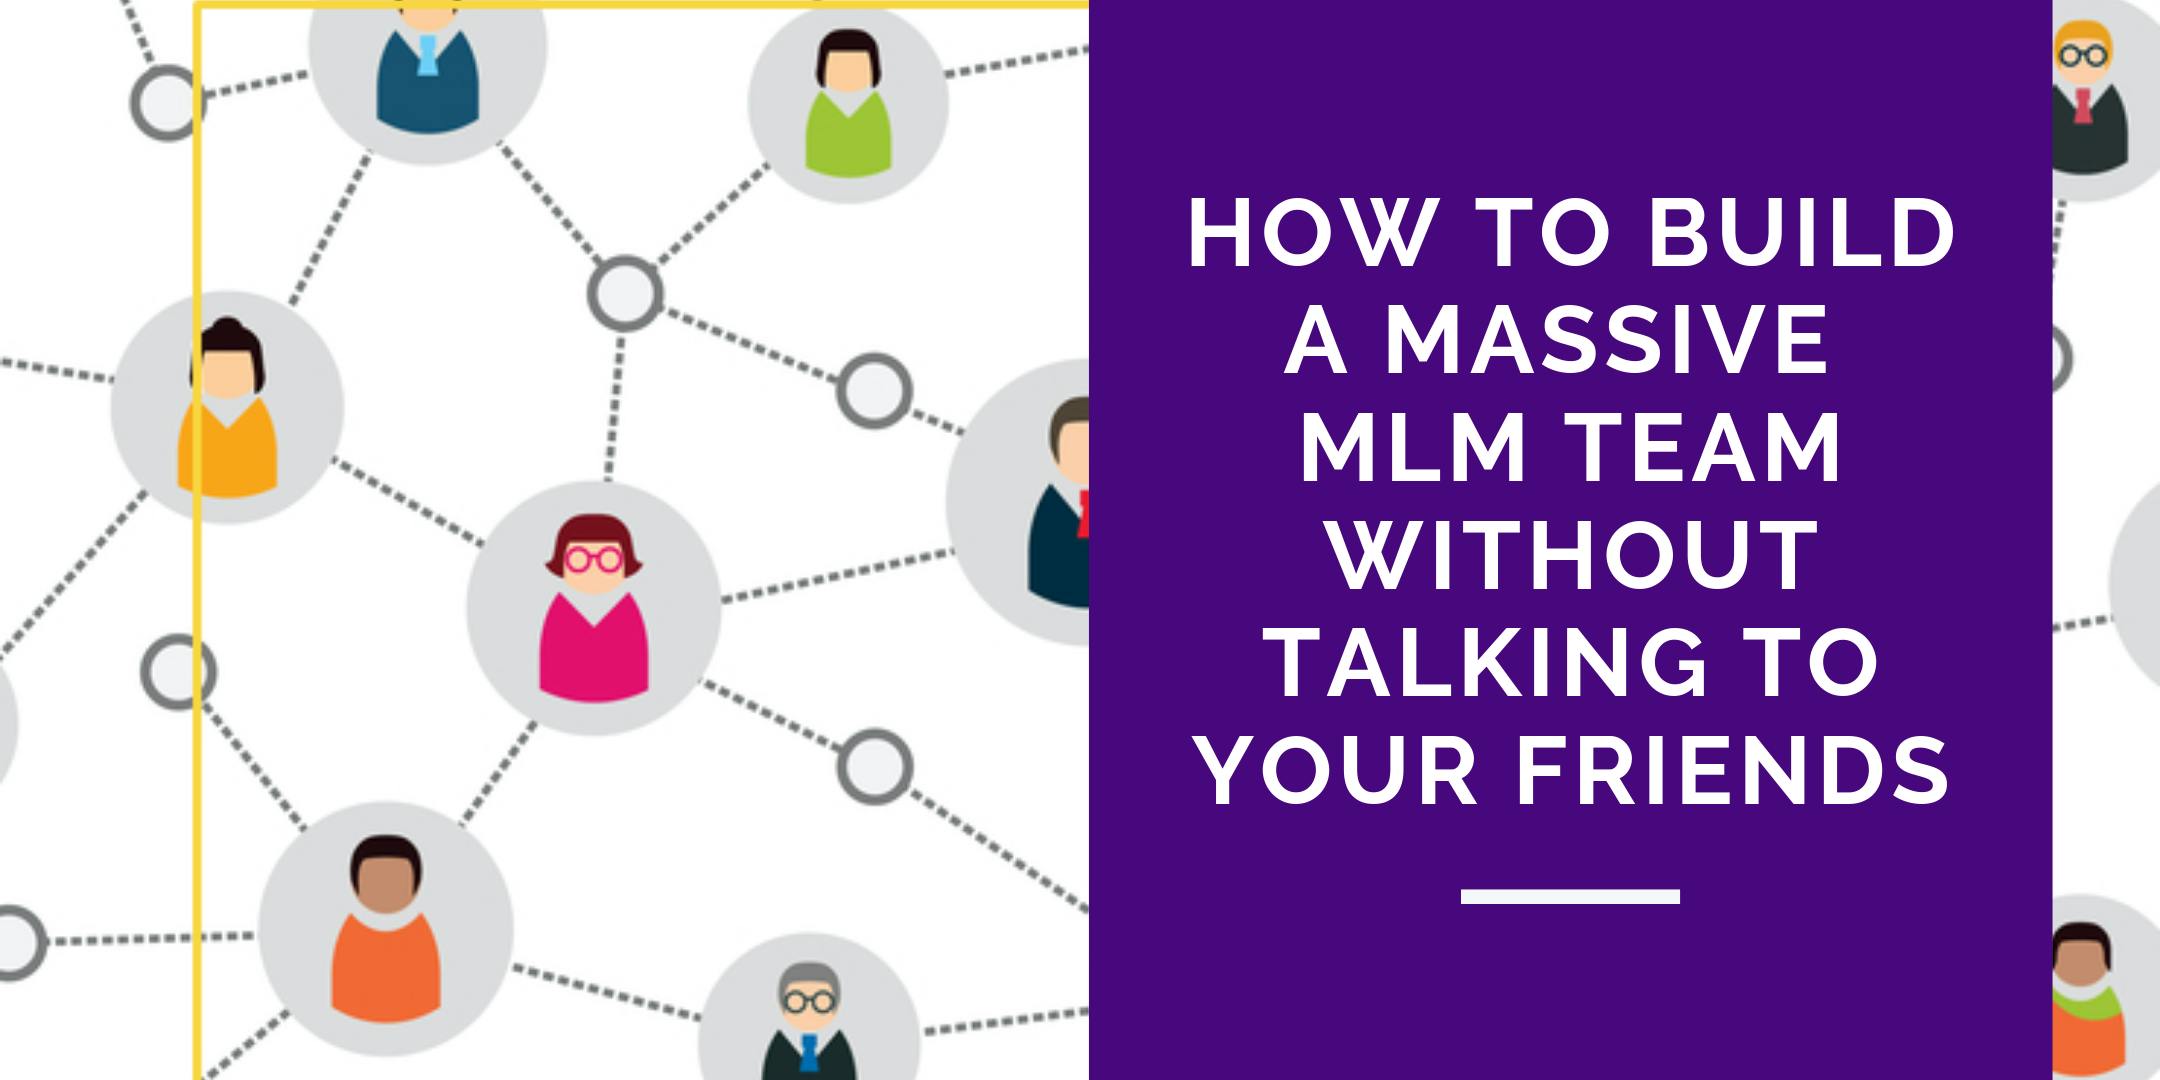 【WEBINAR】How To Build a Massive MLM Team without Talking To Friends!